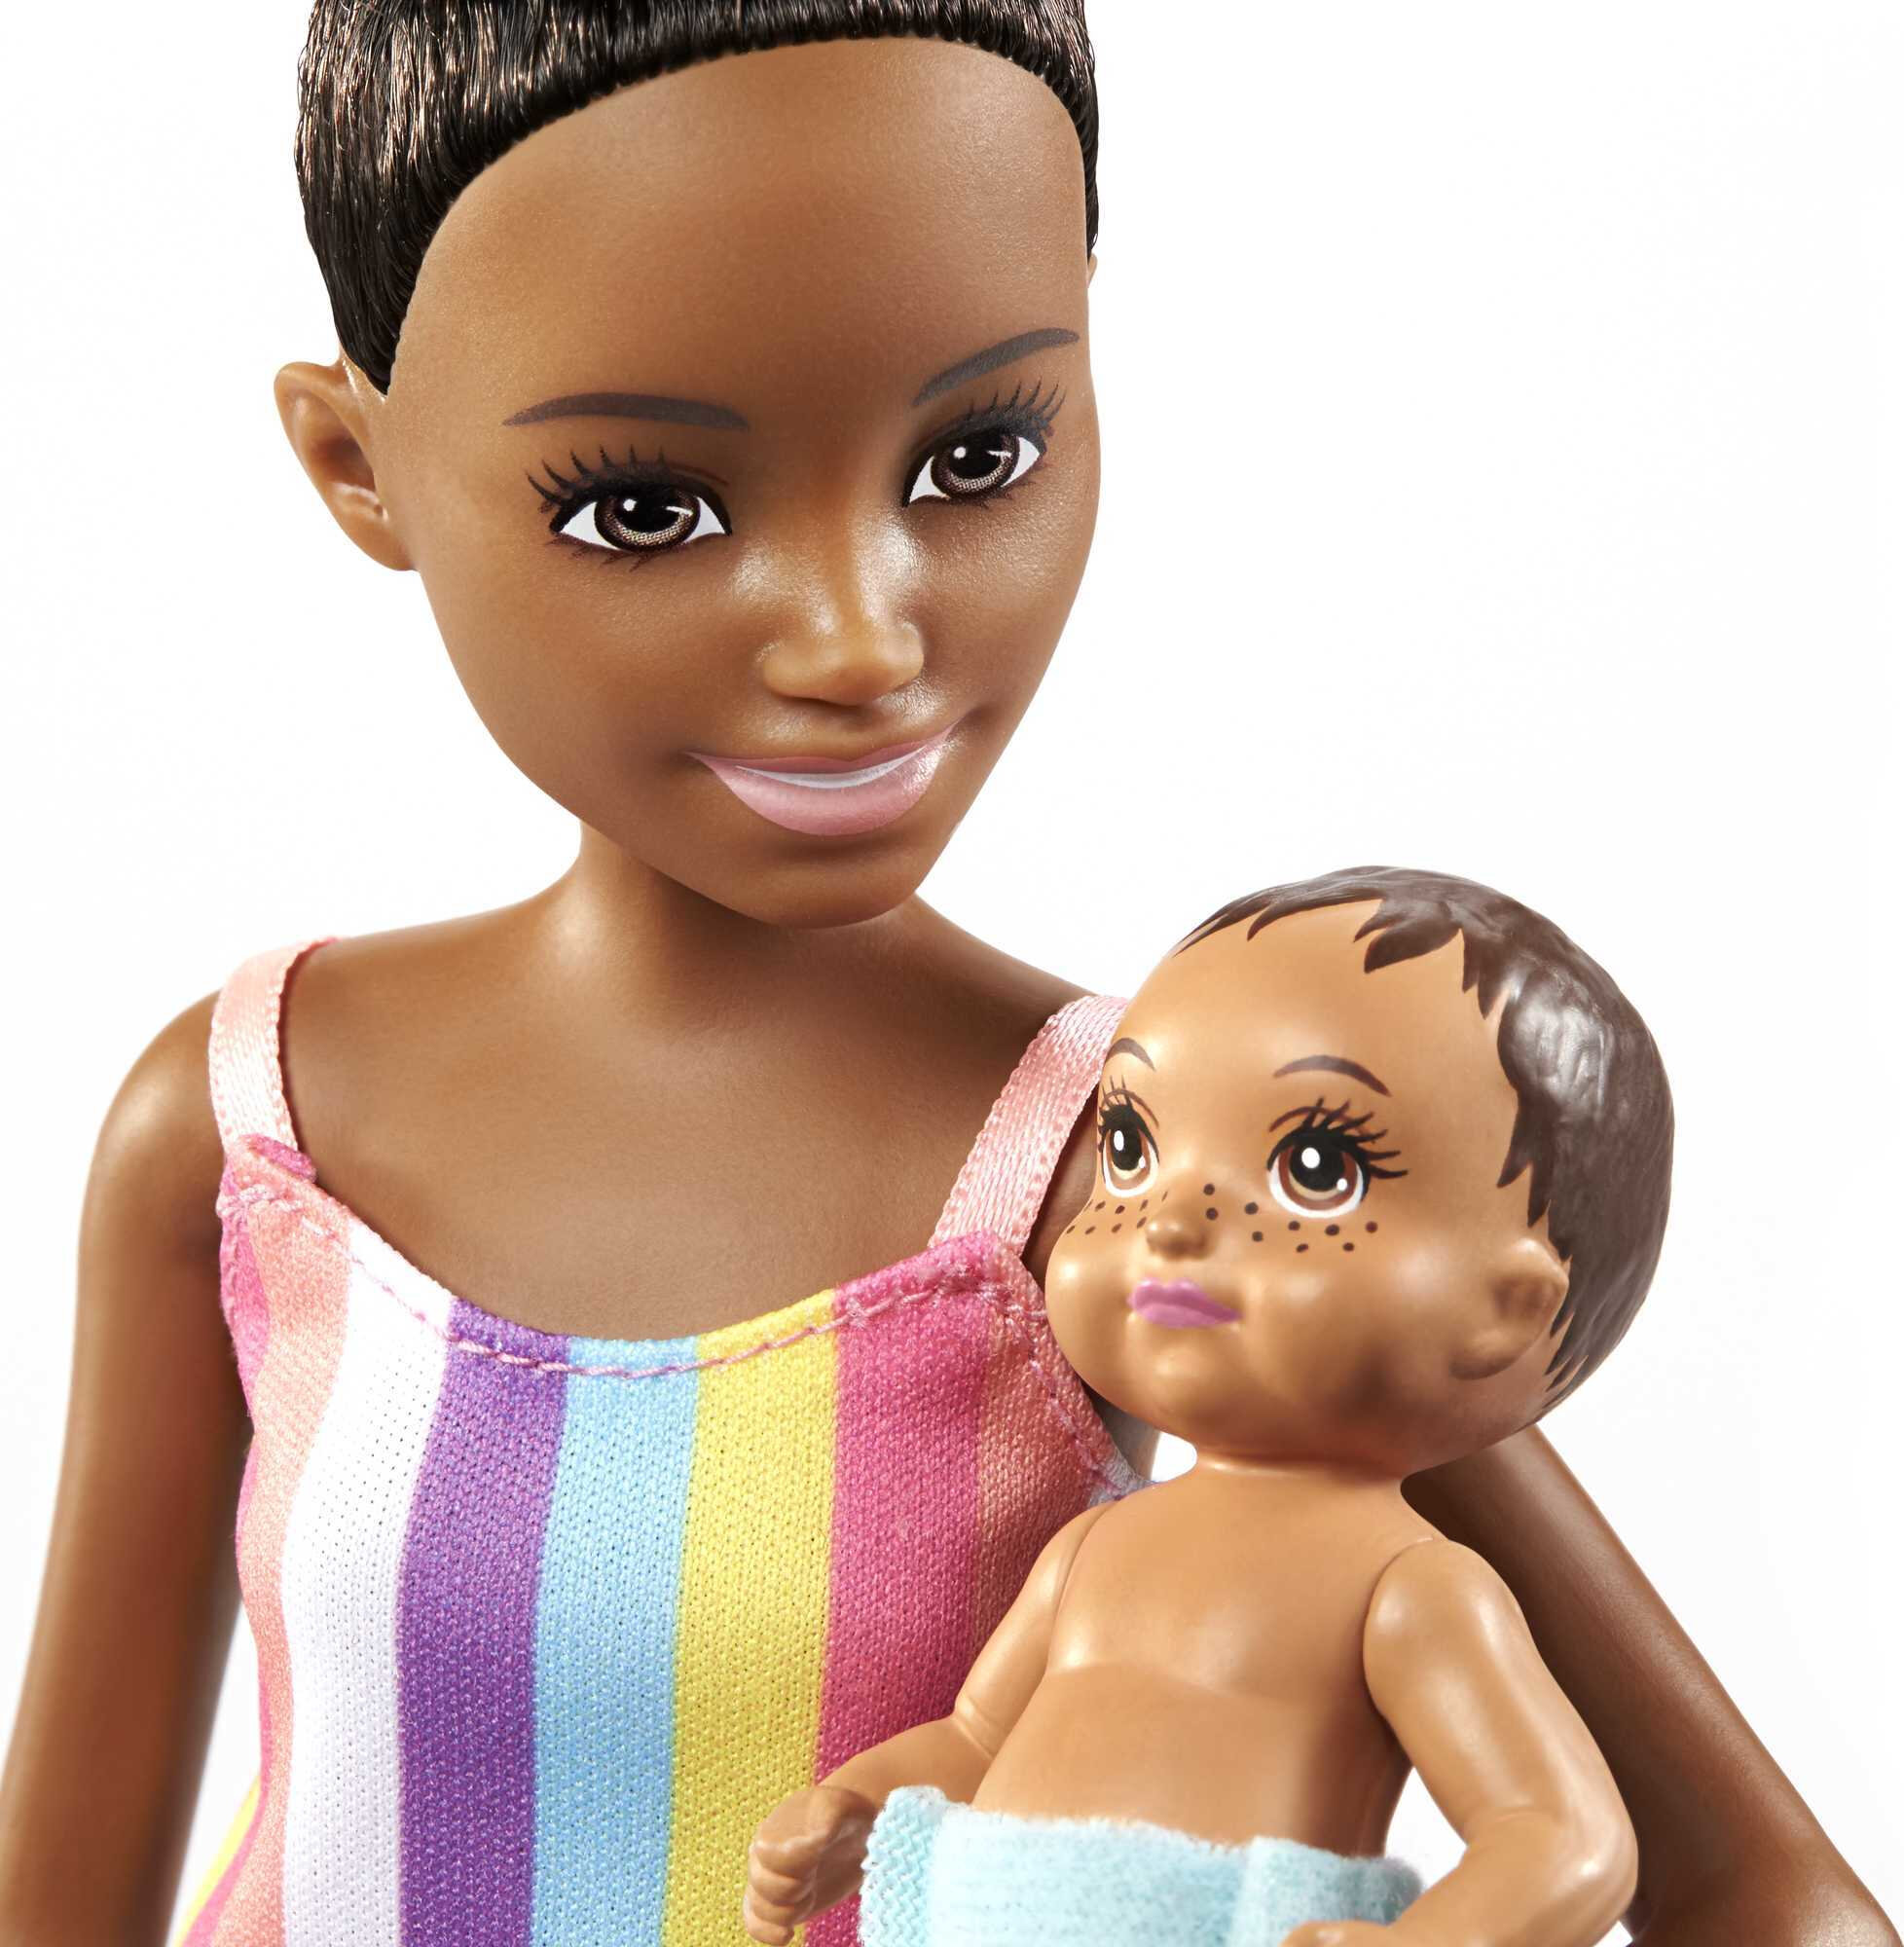 Barbie Skipper Babysitters Inc Dolls and Accessories - image 3 of 6